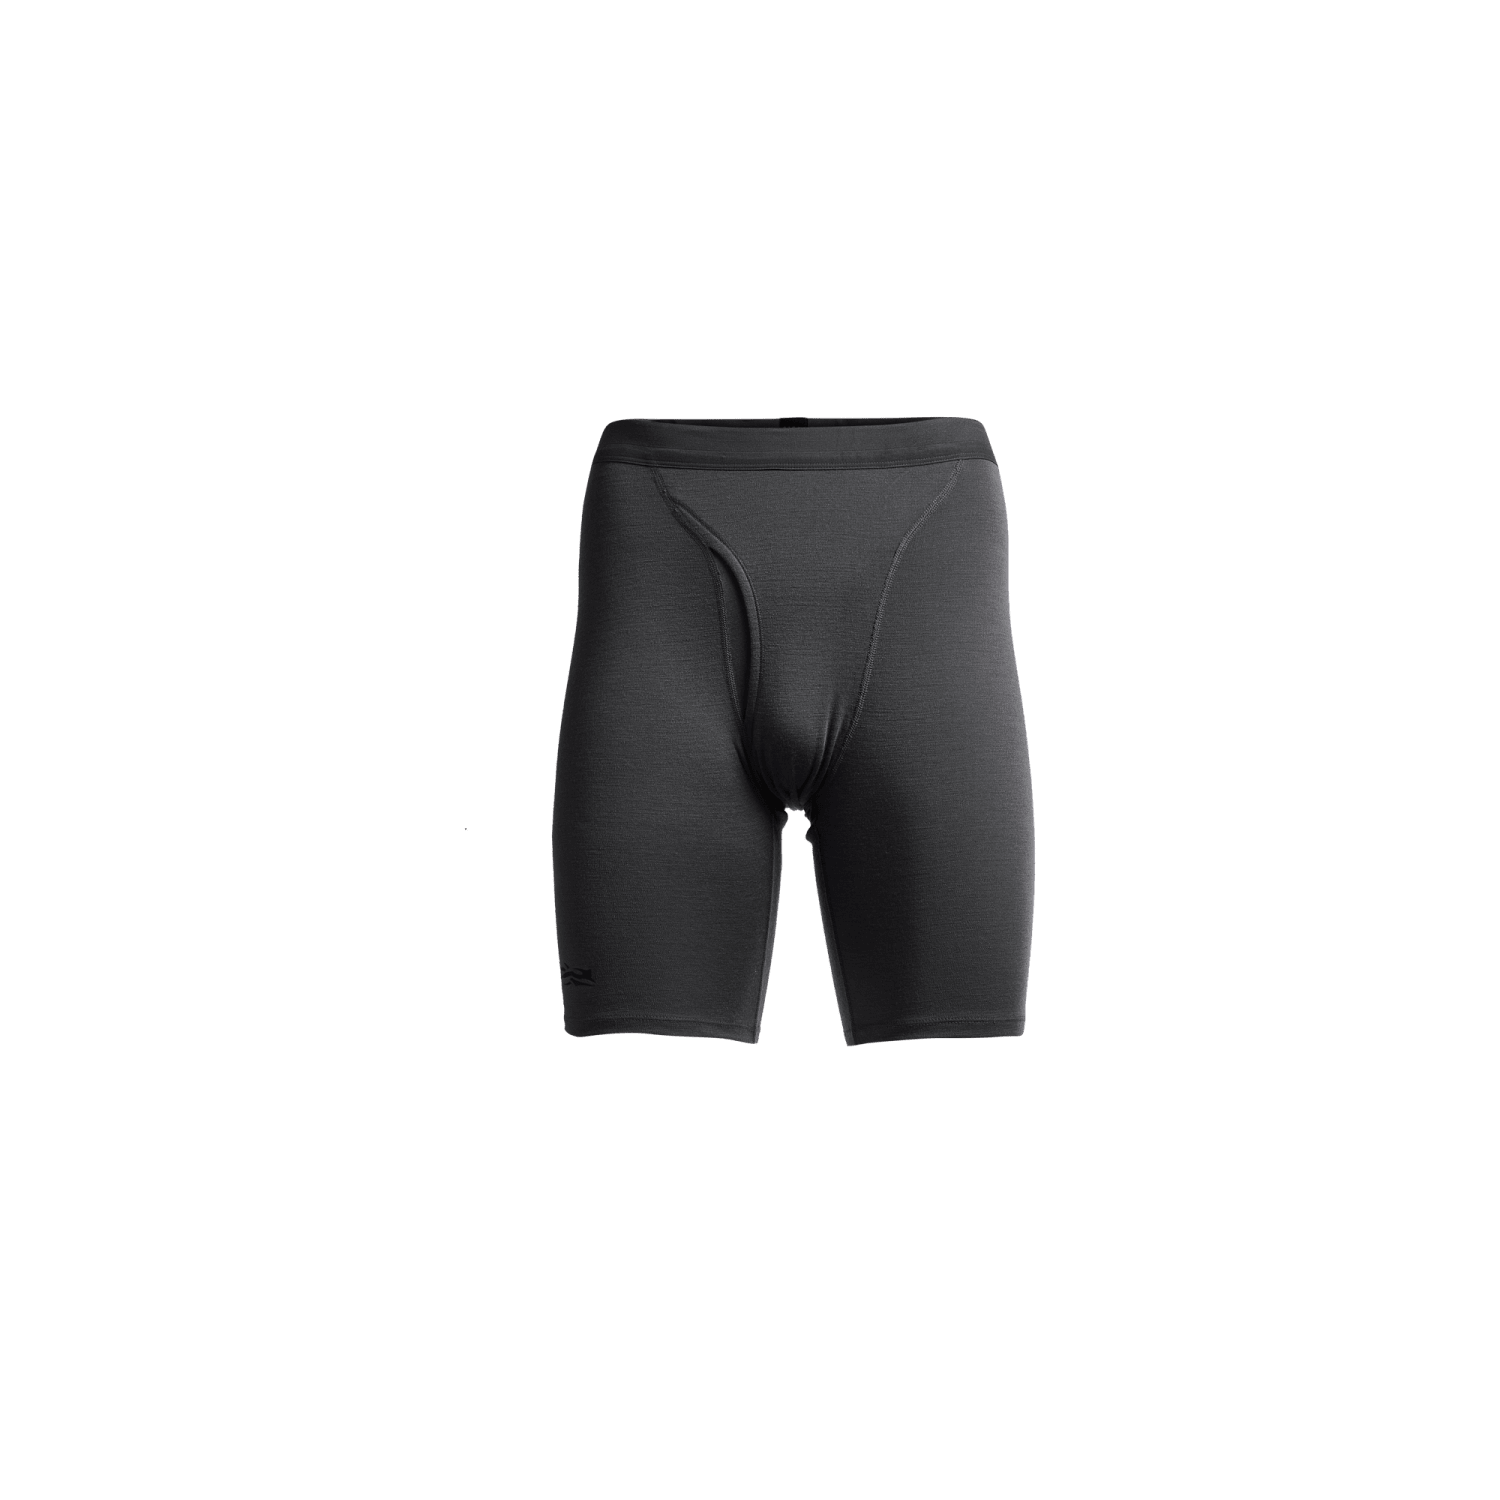 Core Merino 220 Boxer: Ultimate Comfort for Cold Weather Hunts